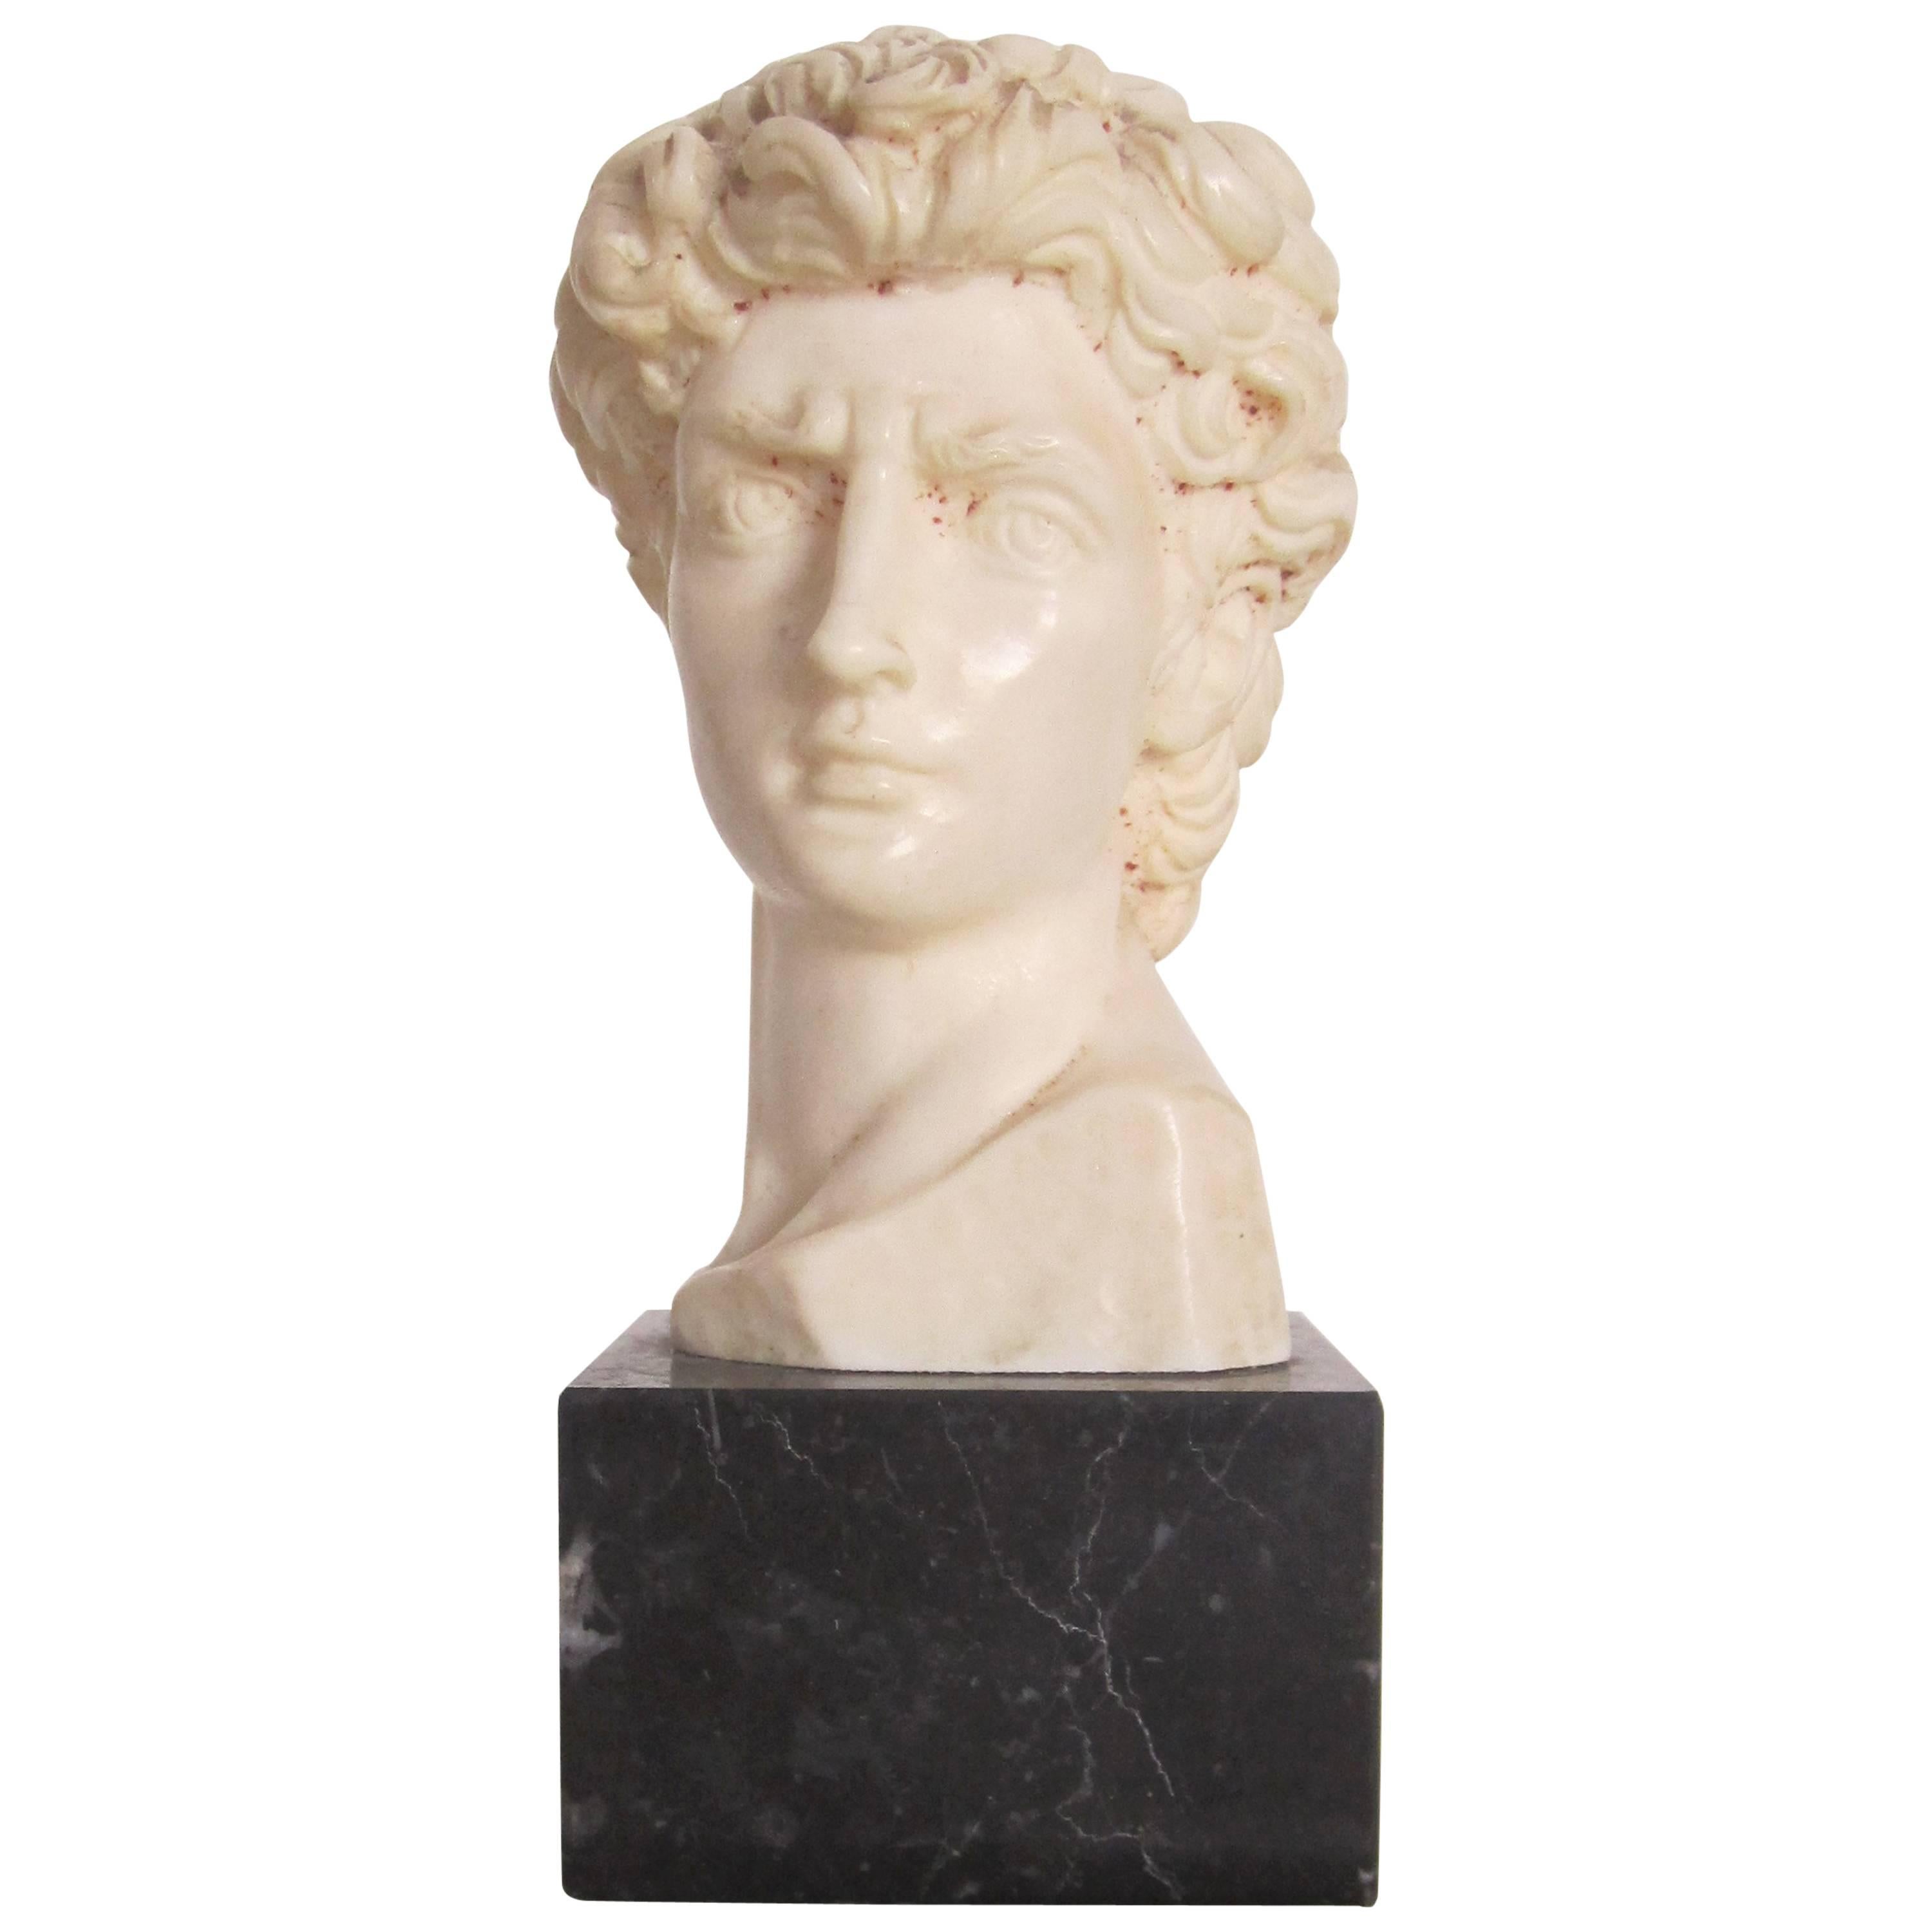 Classic Roman Bust on Black Marble Base Signed by Sculptor G. Ruggeri, Italy